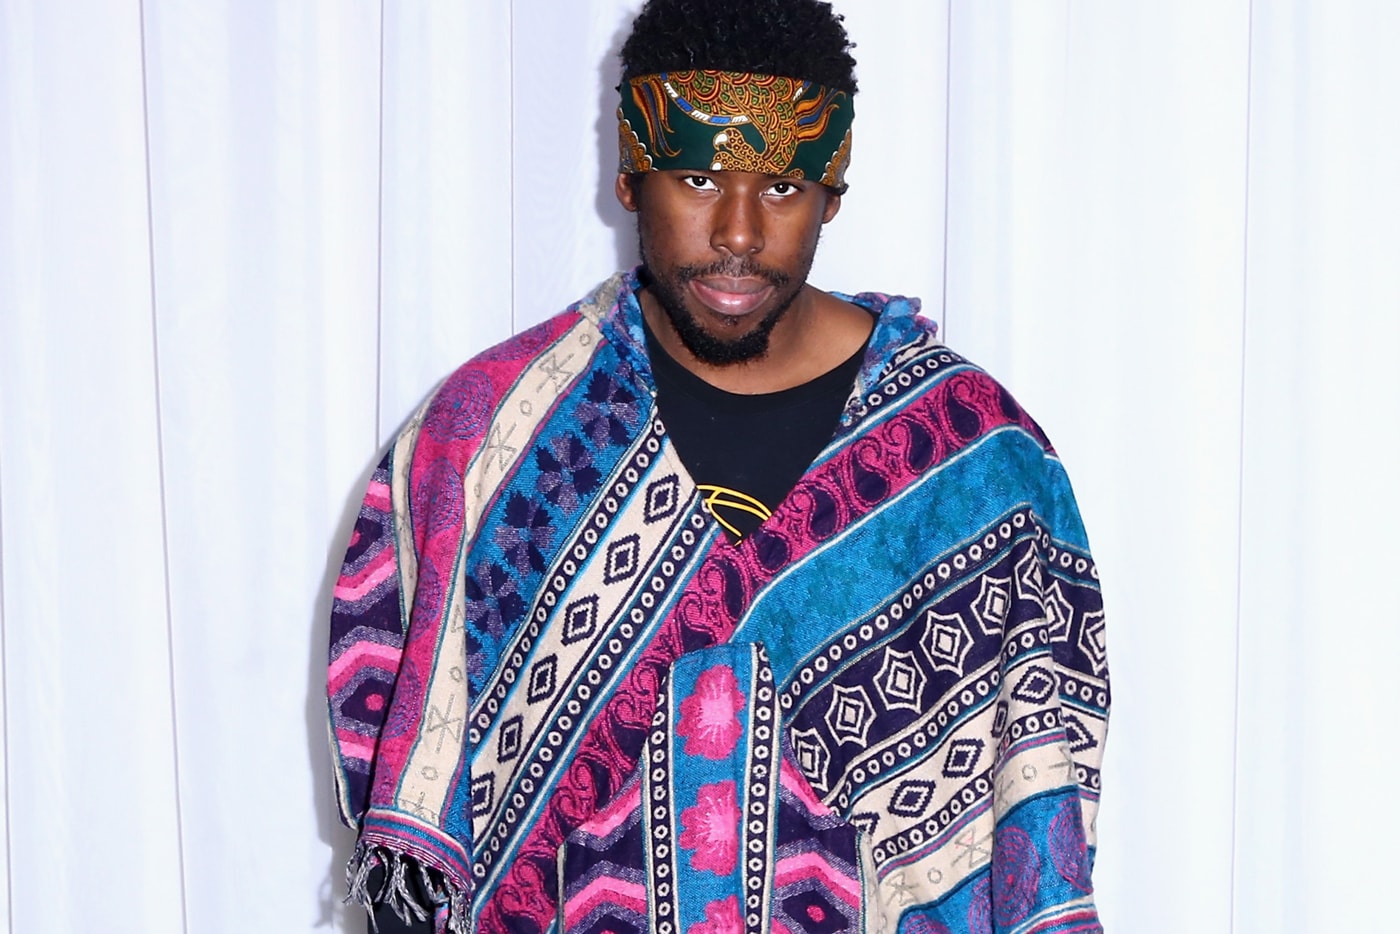 Listen to a J Dilla Tribute Mix from Flying Lotus